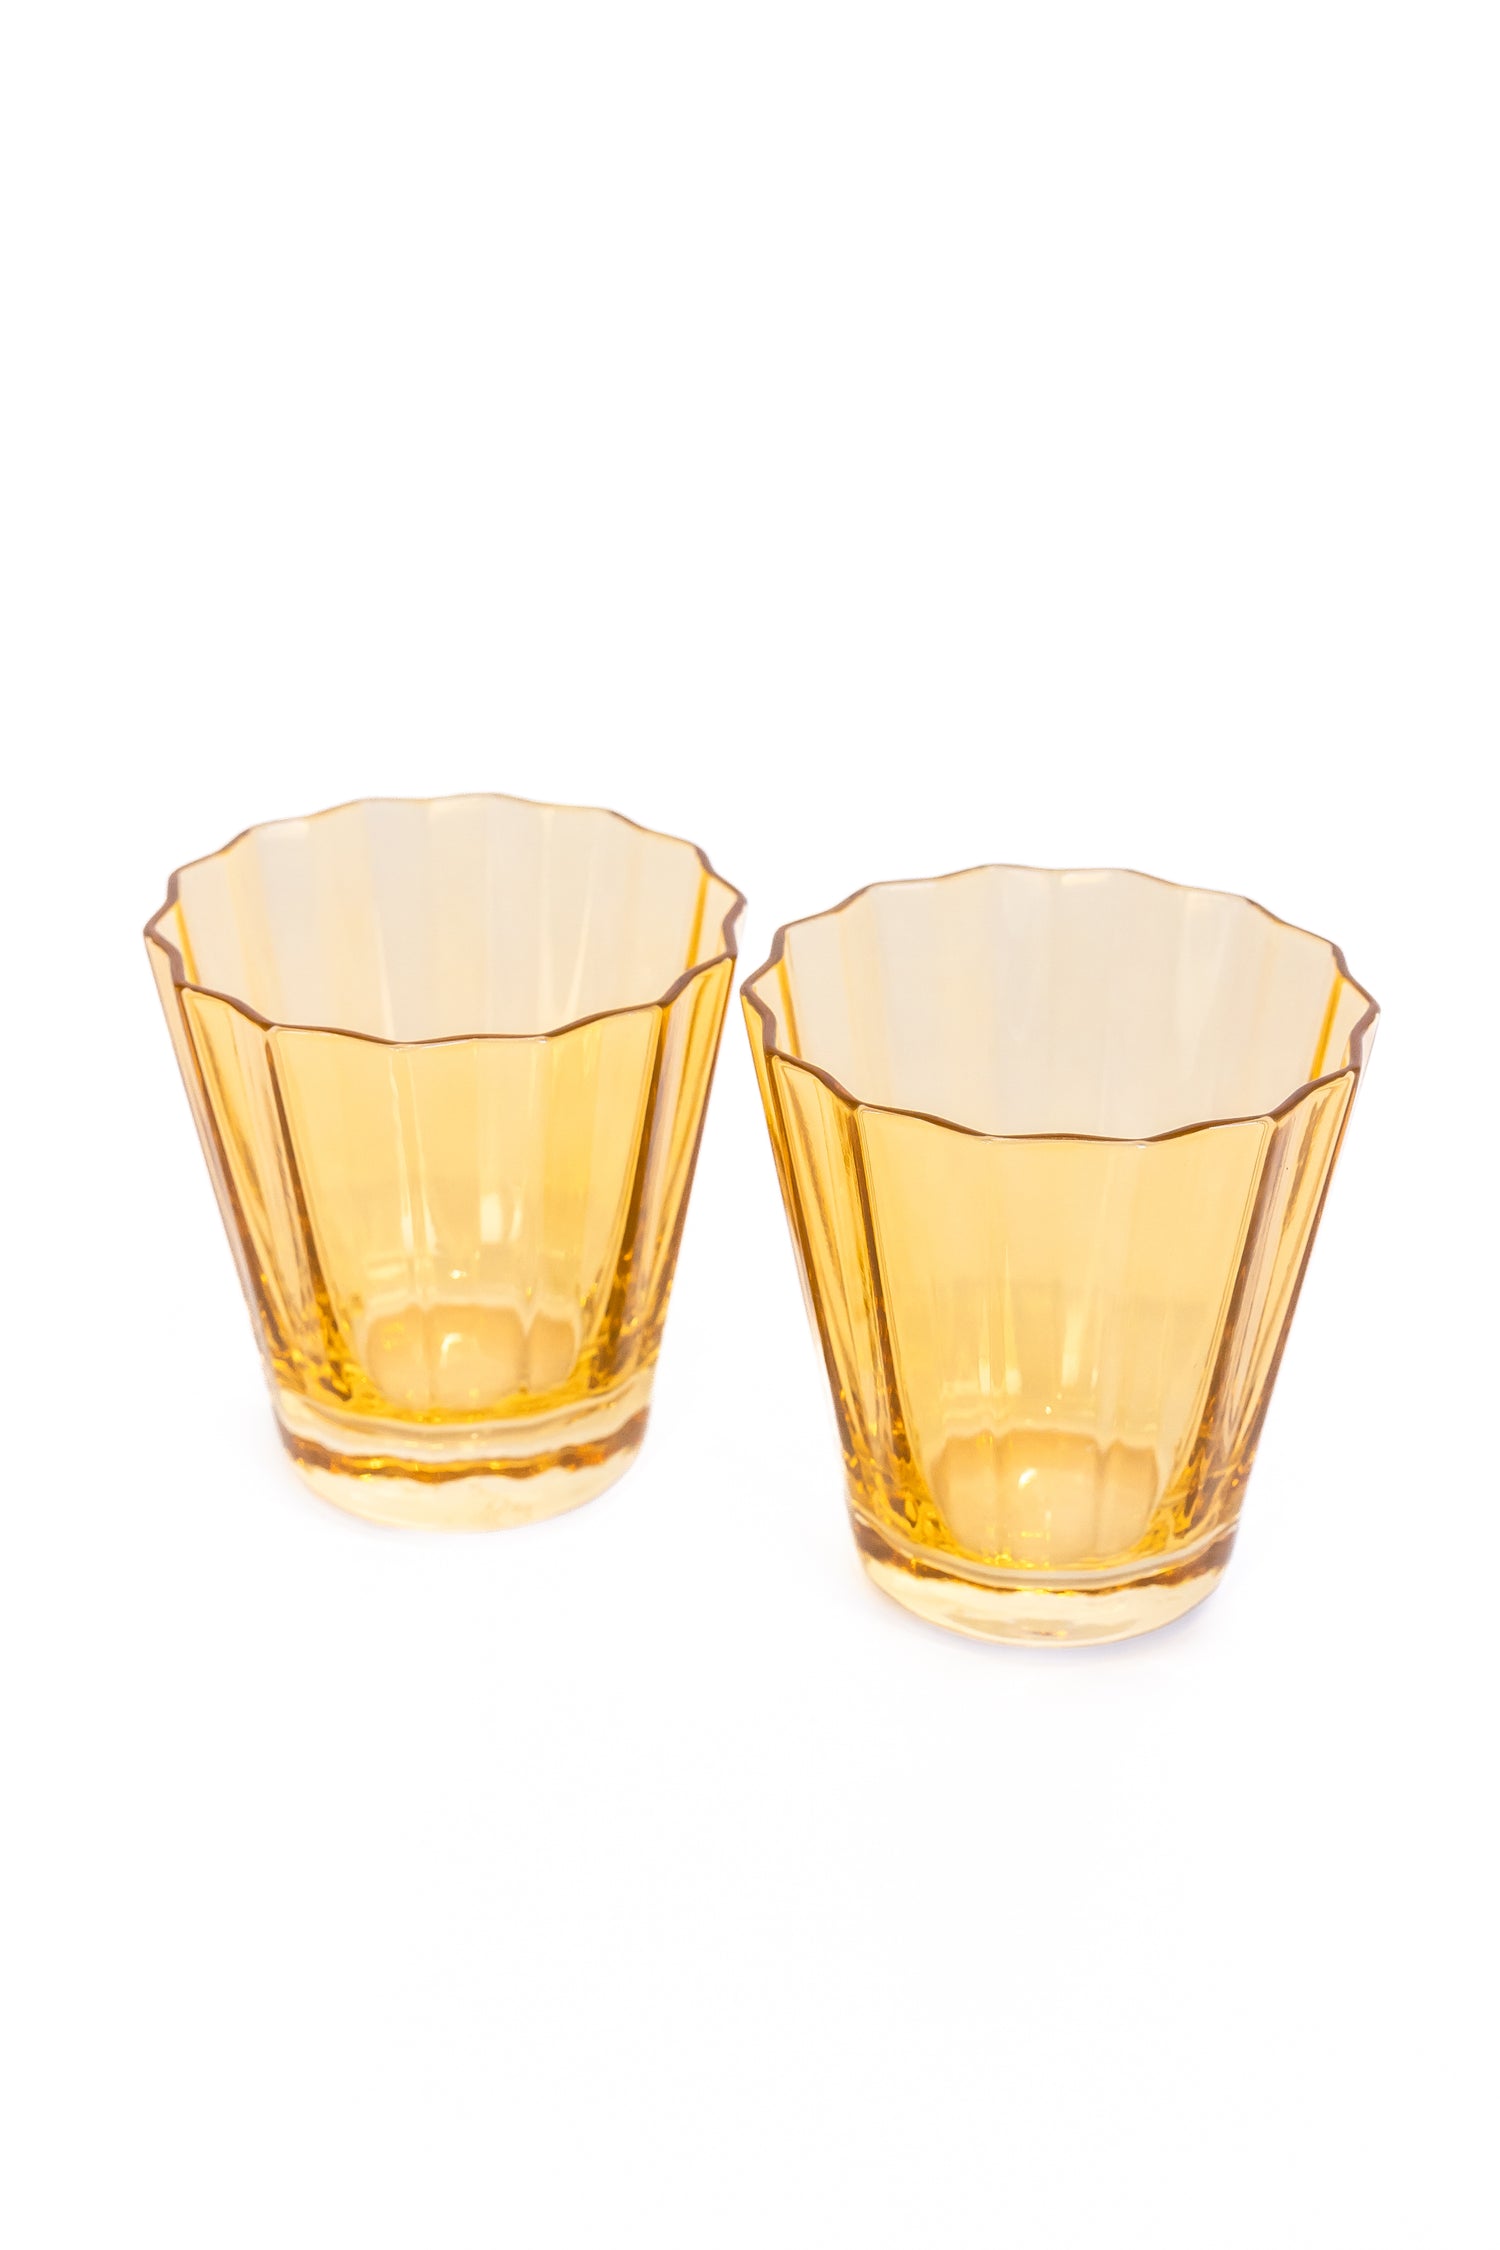 Estelle Colored Sunday Low Balls - Set of 2 {Yellow}